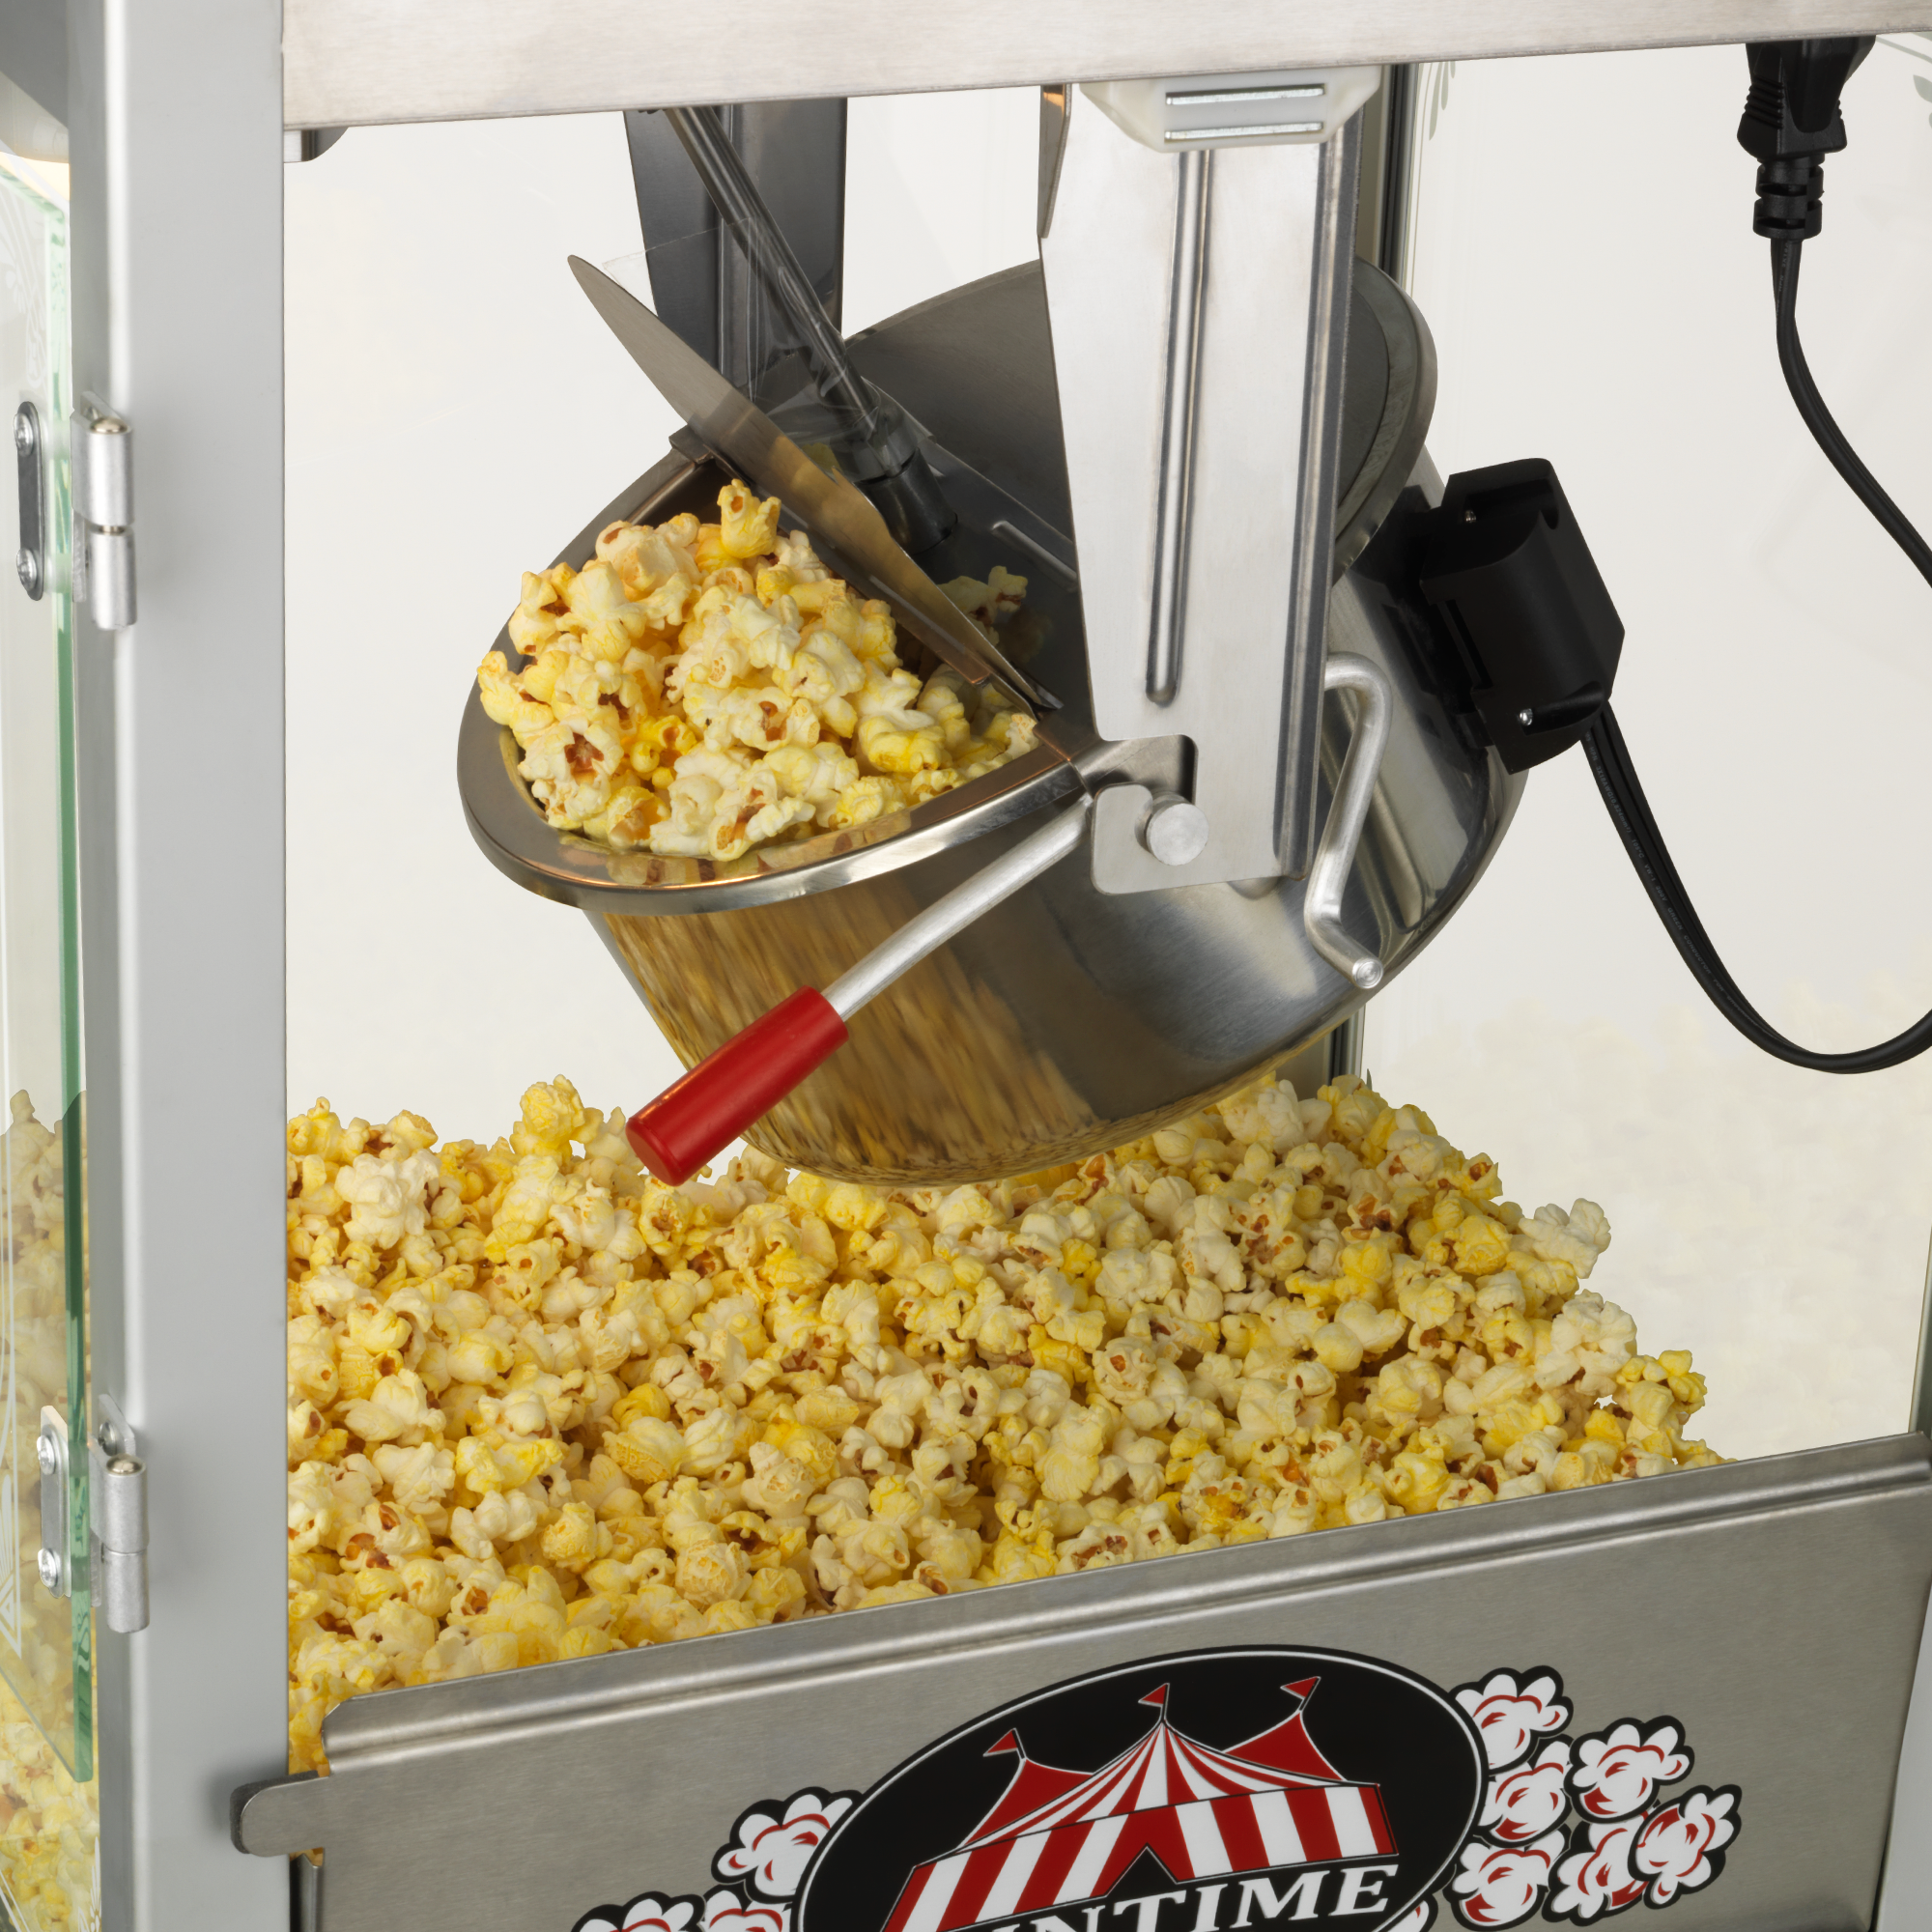 Biddergy - Worldwide Online Auction and Liquidation Services - CLASS A -  DASH 16-Cup Electric Popcorn Popper